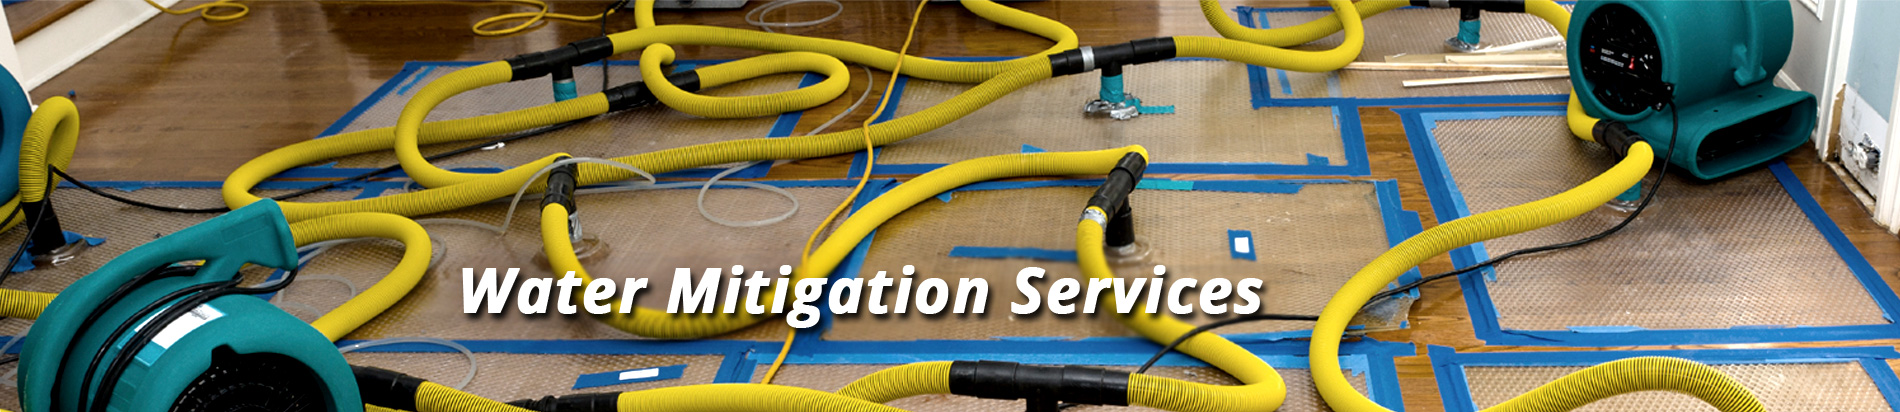 Insurance-Water-Mitigation-Services